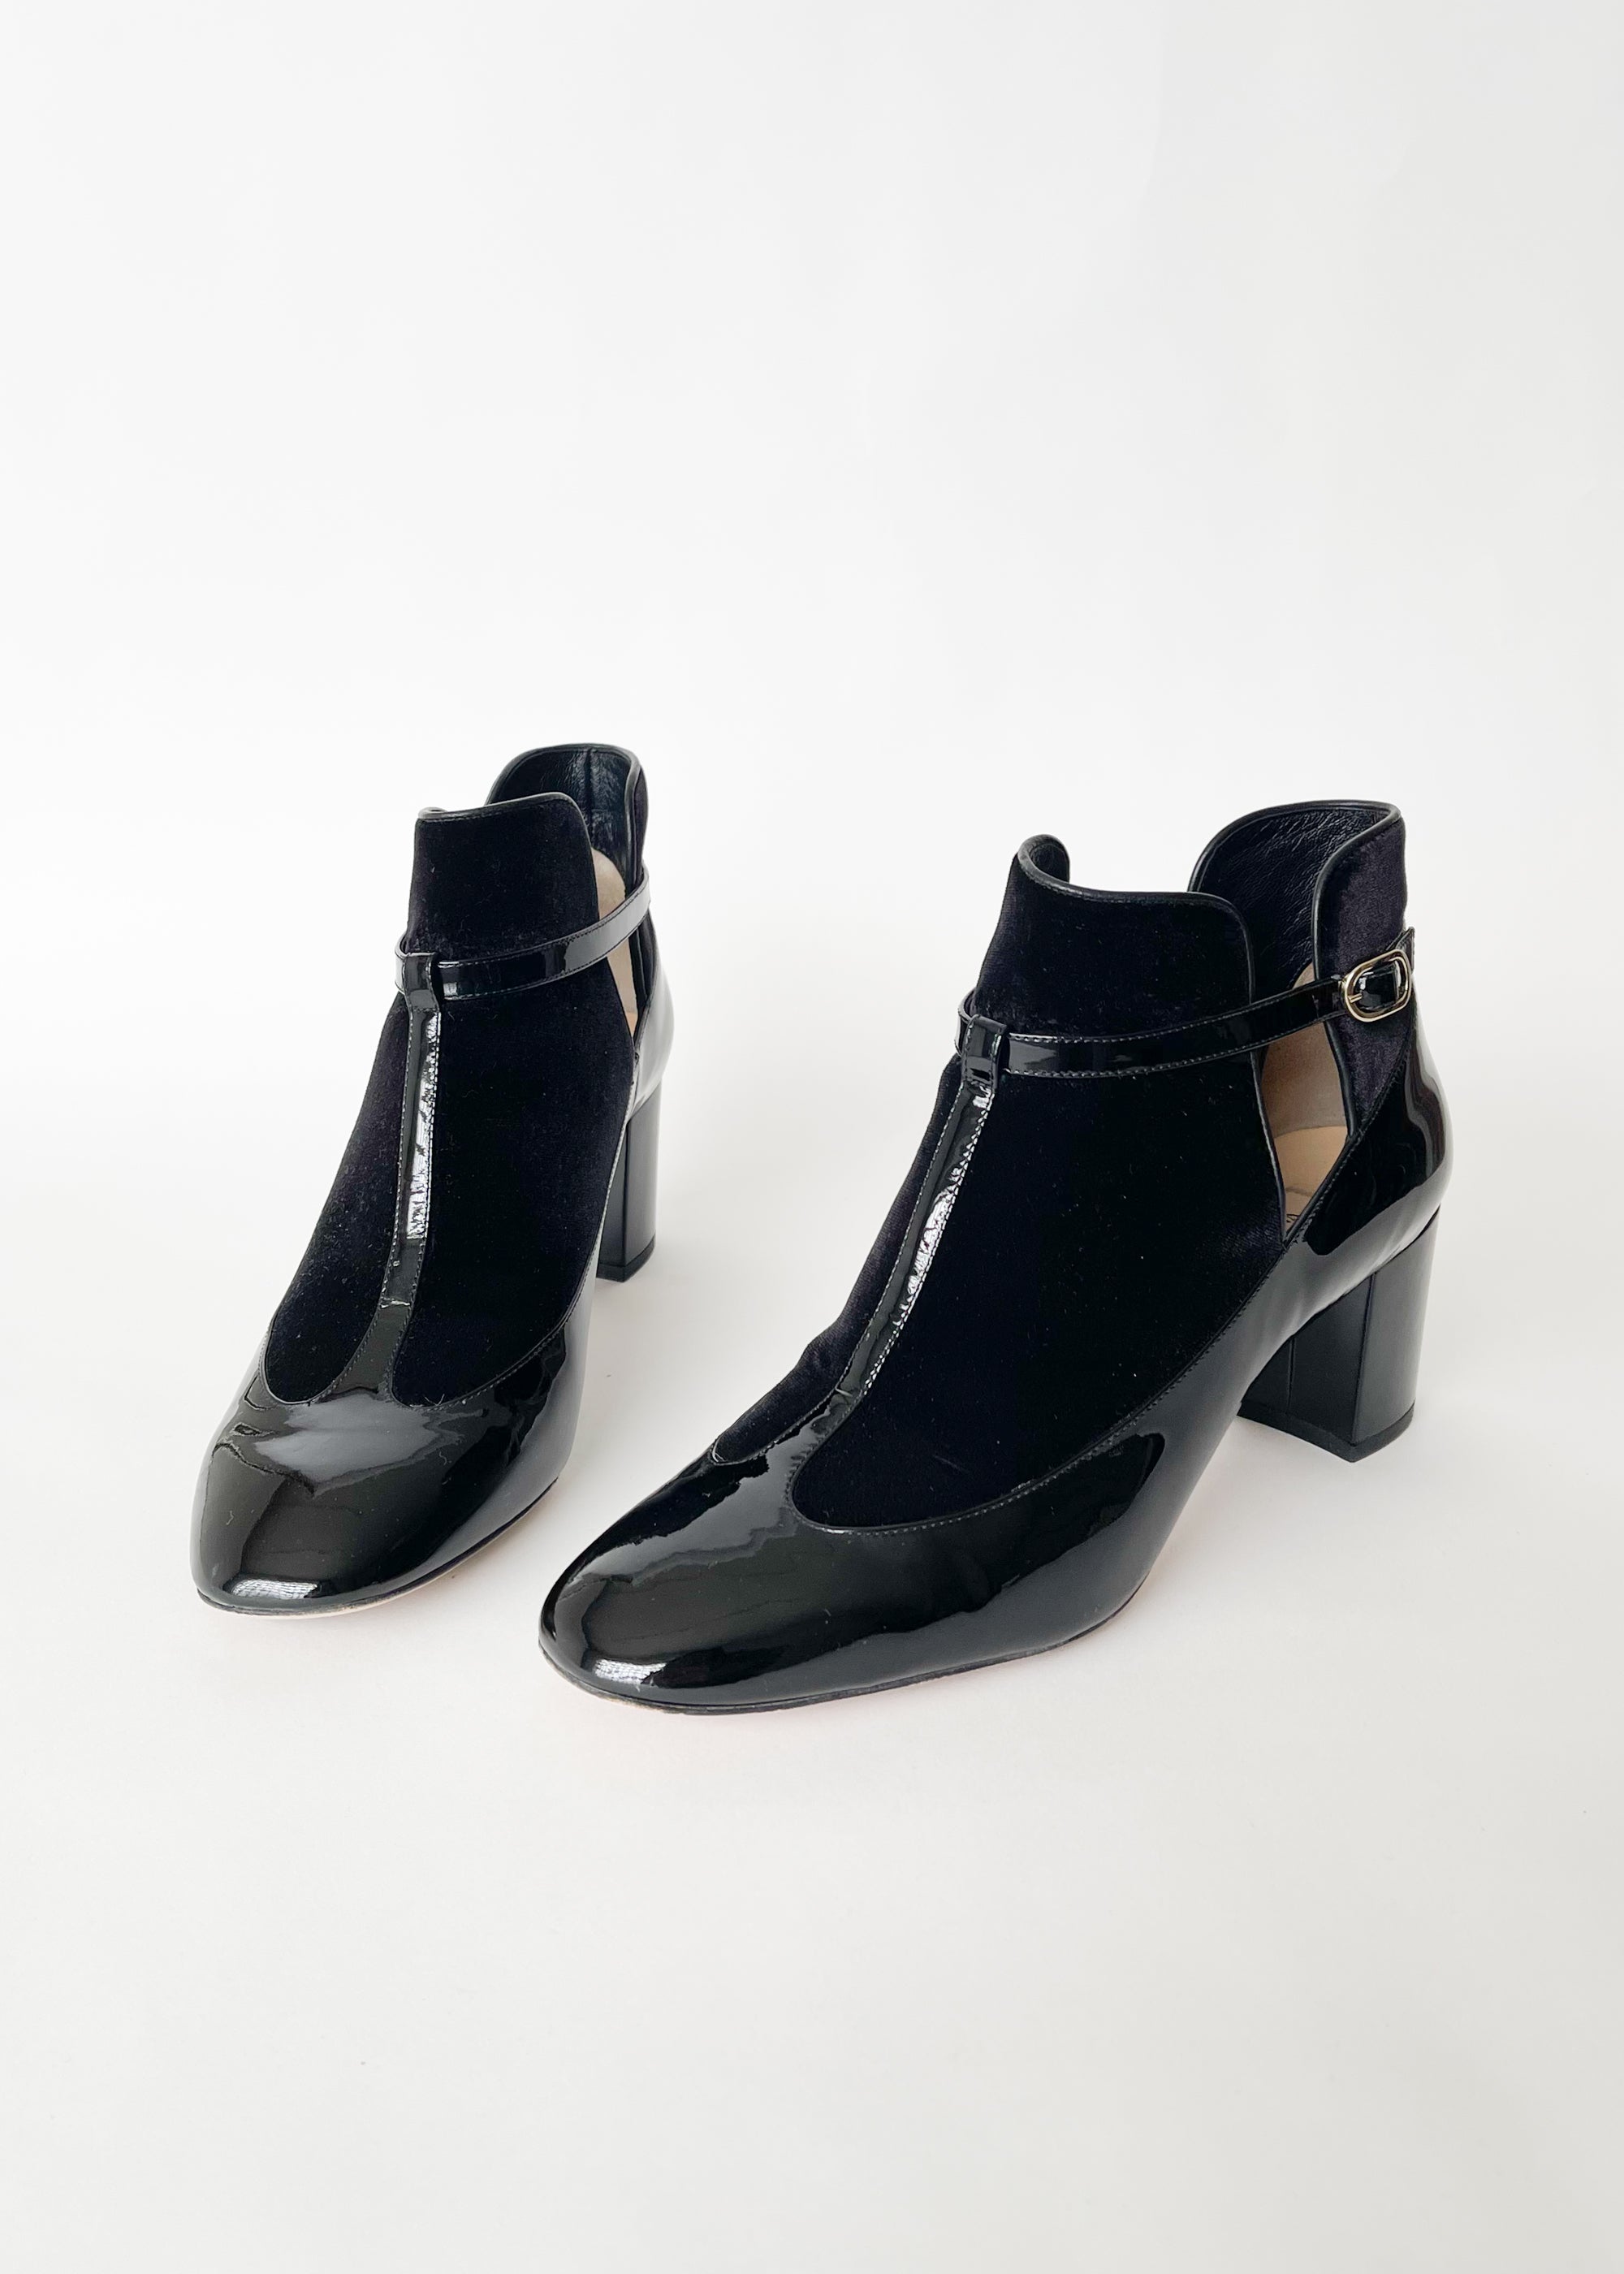 Valentino Black Patent and Velvet T-Strap Boots - Raleigh Vintage